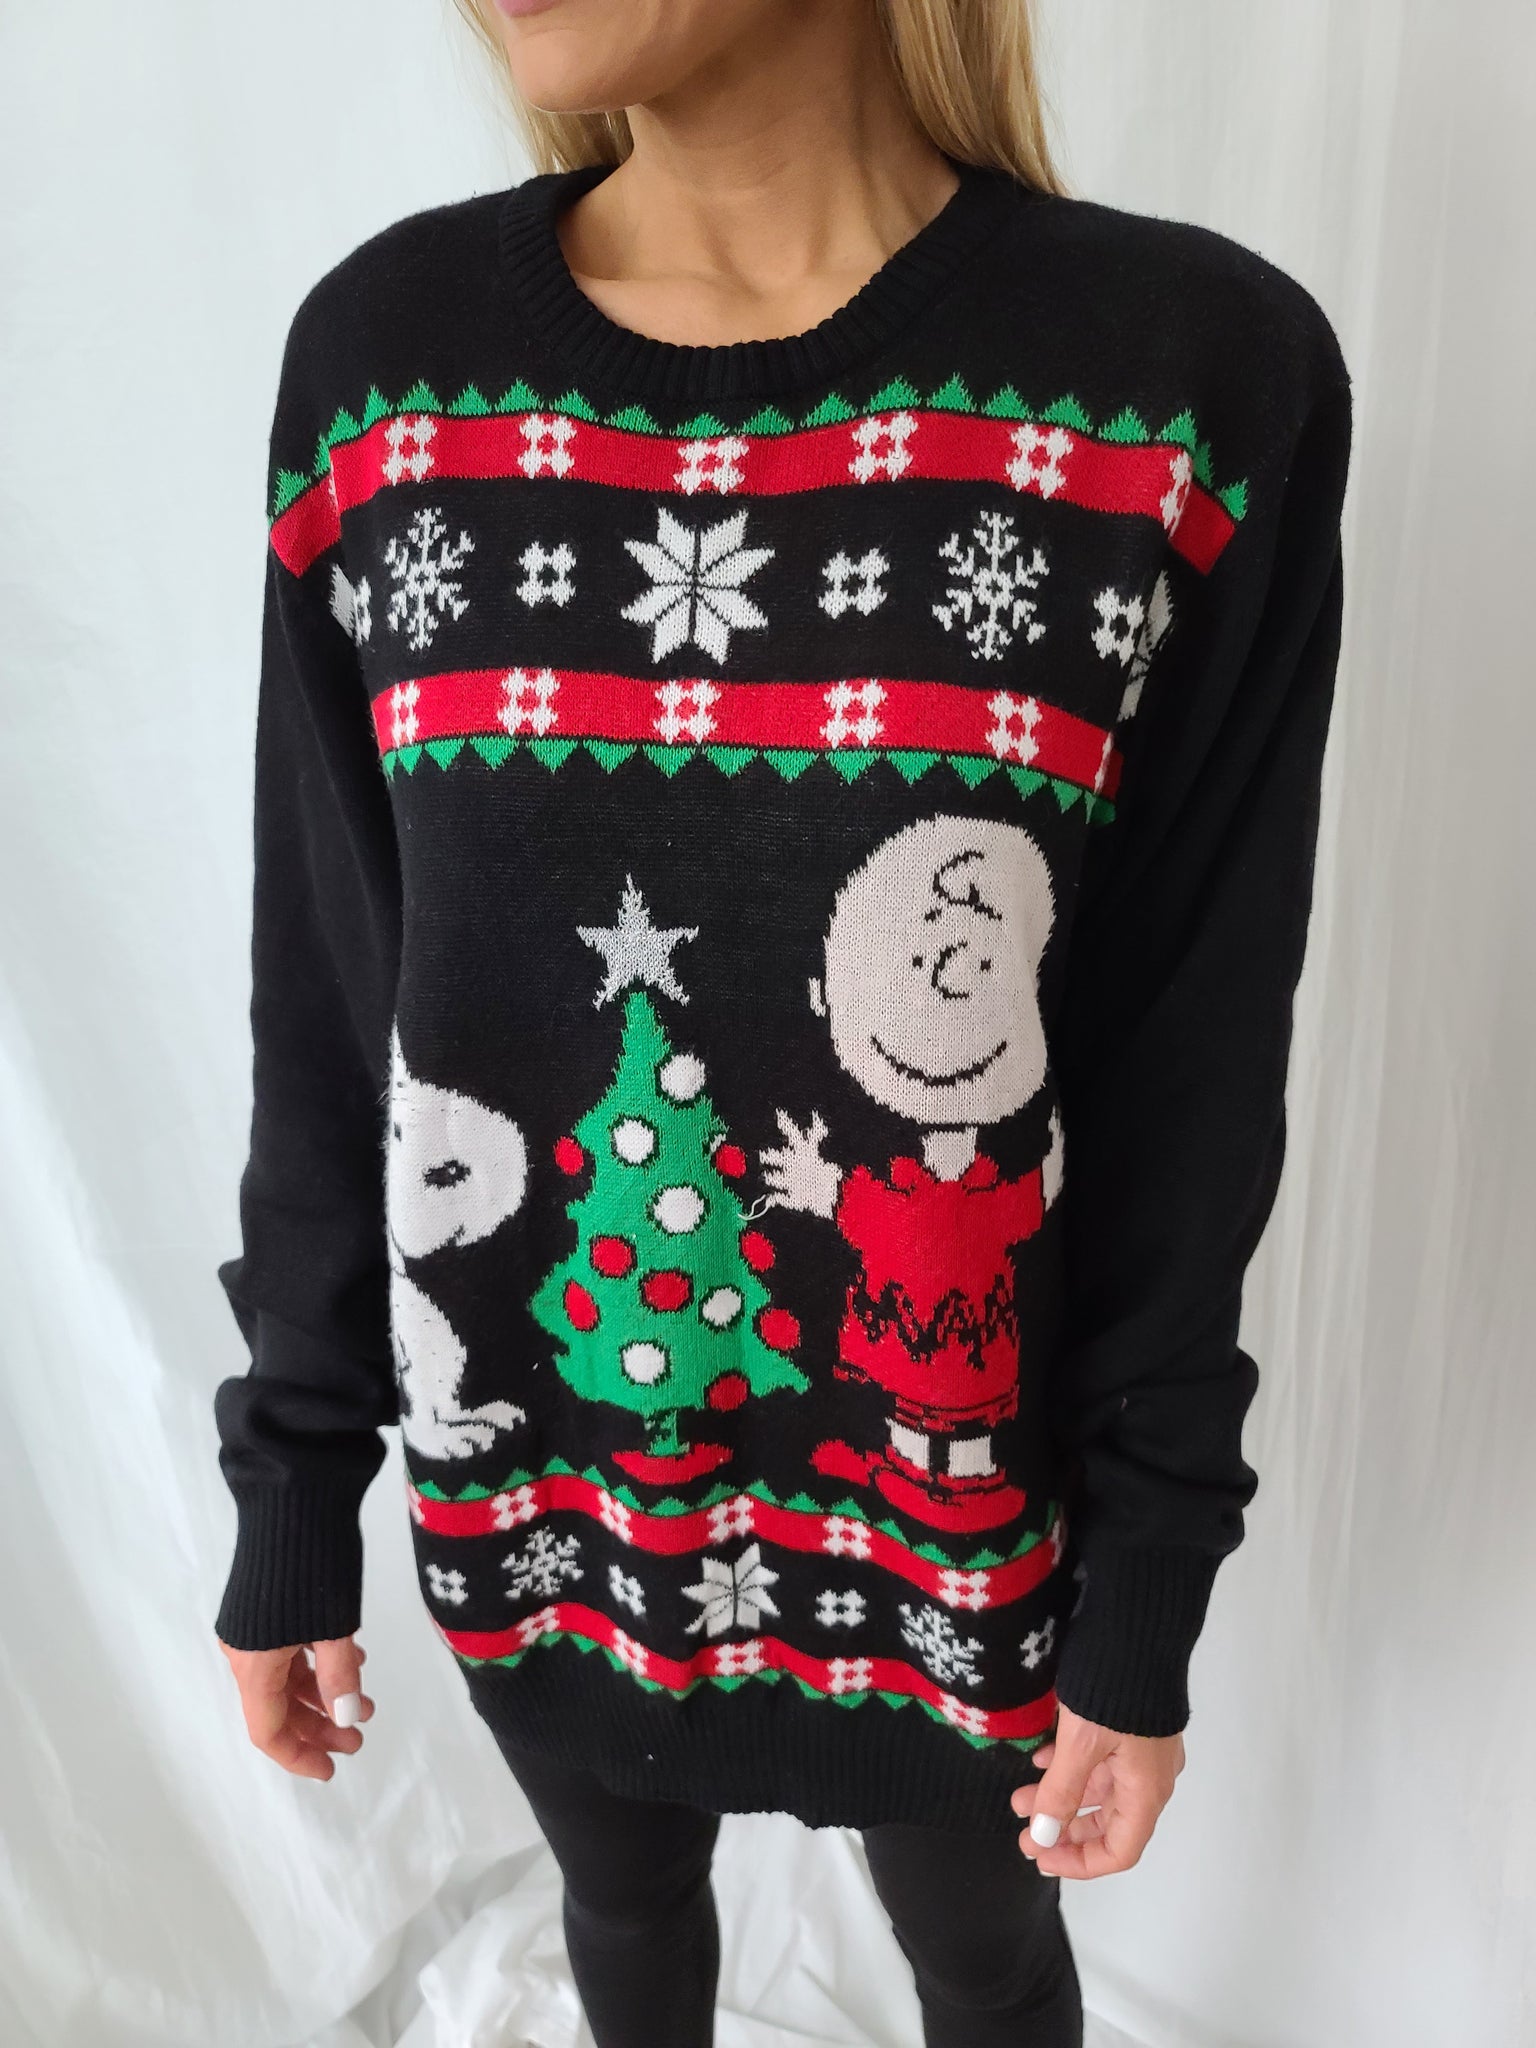 Peanuts collectable Charlie Brown and Snoopy Christmas Sweater